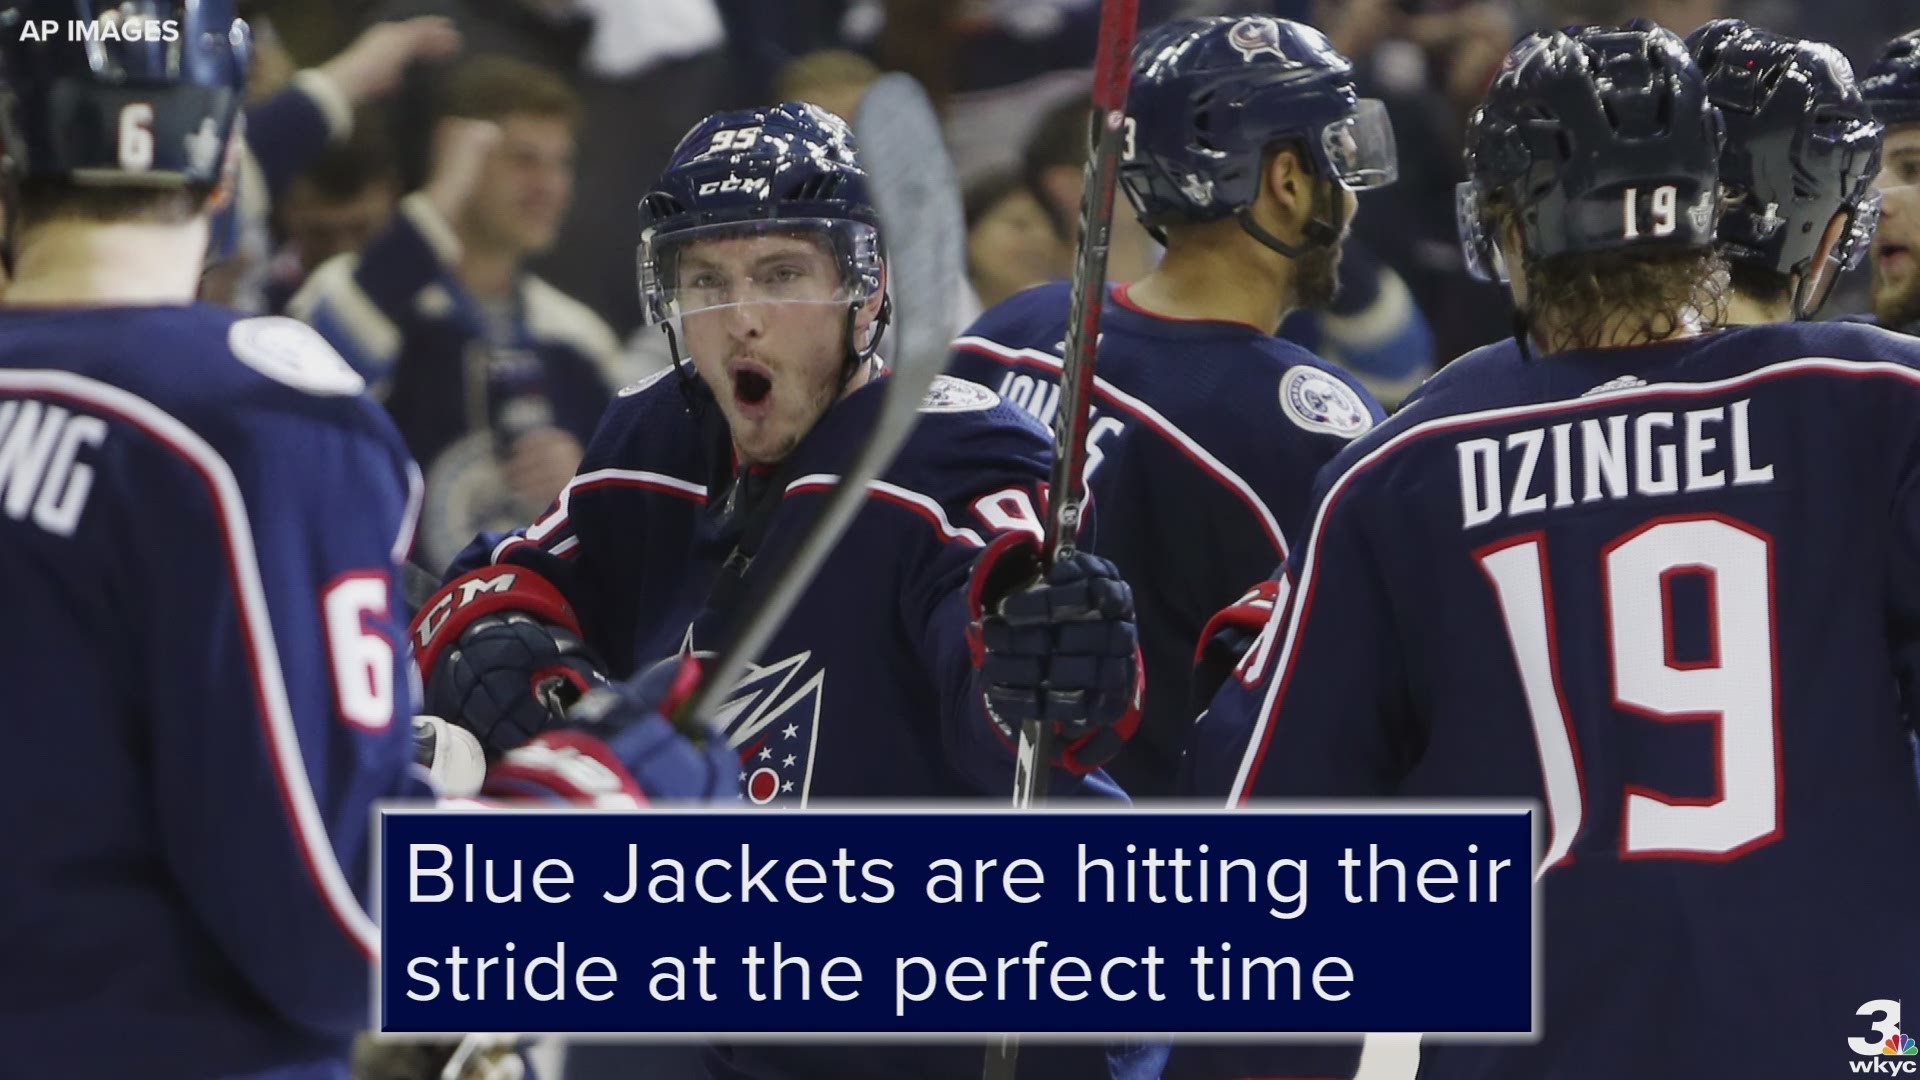 NHL playoffs: Blue Jackets rally from 3-goal deficit to beat Lightning 4-3;  Sharks past Golden Knights 5-2 - Los Angeles Times